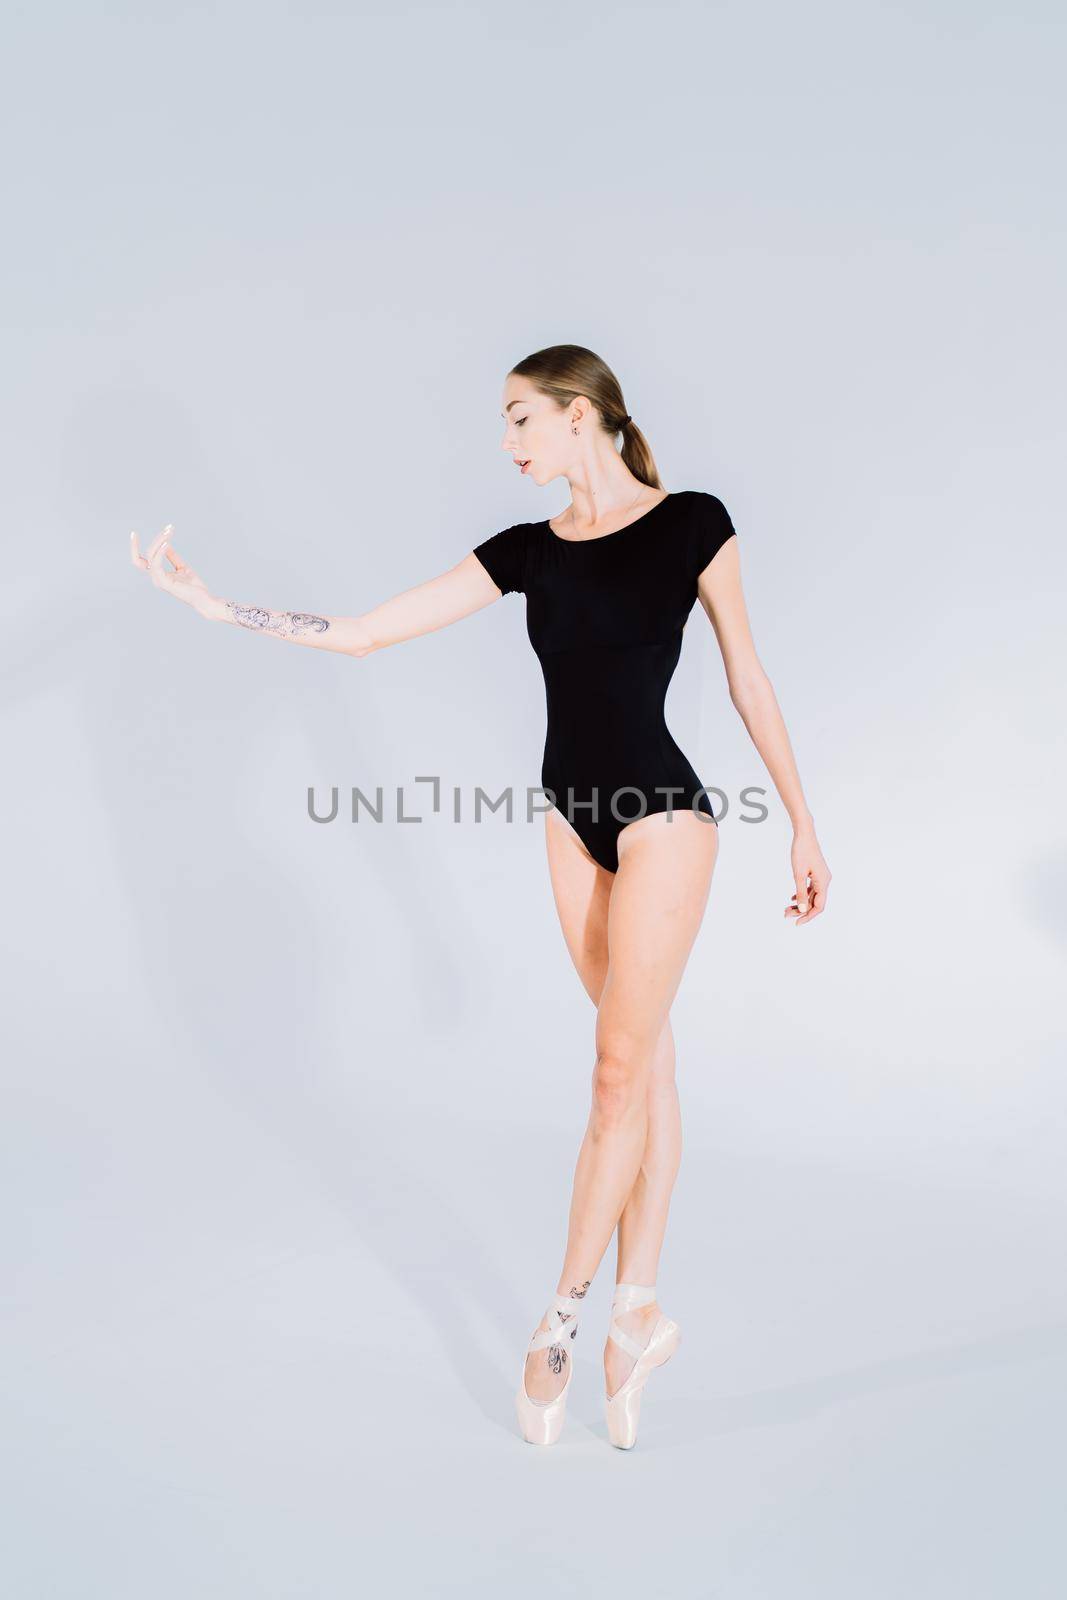 Ballerina in black bodysuit practicing on white studio background. Woman dancing classical pas. Alone warming up before performance. Amazing dance. High quality photo